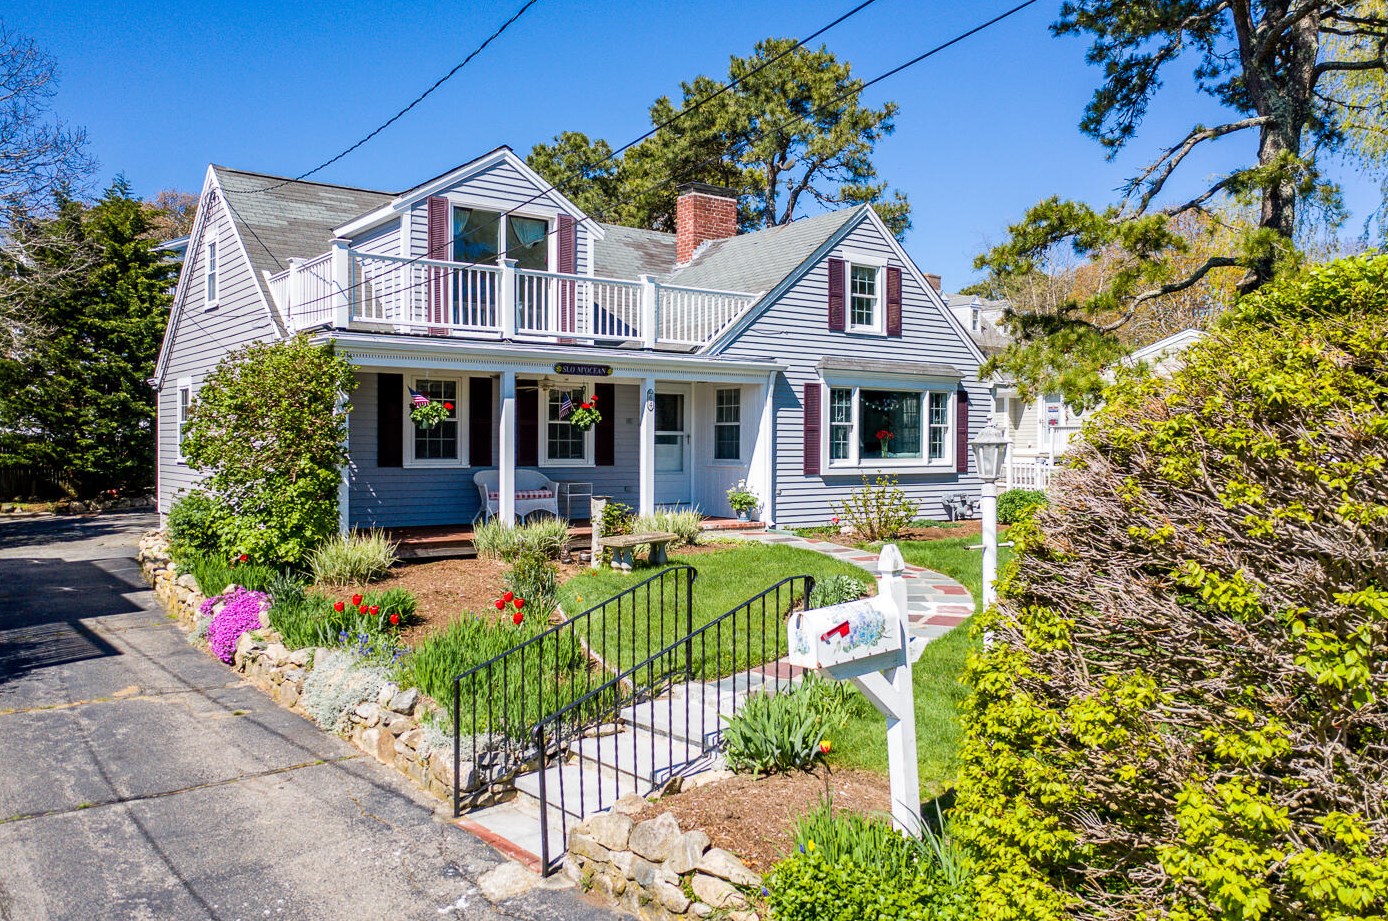 64 Studley Rd, Hyannis, MA 02601